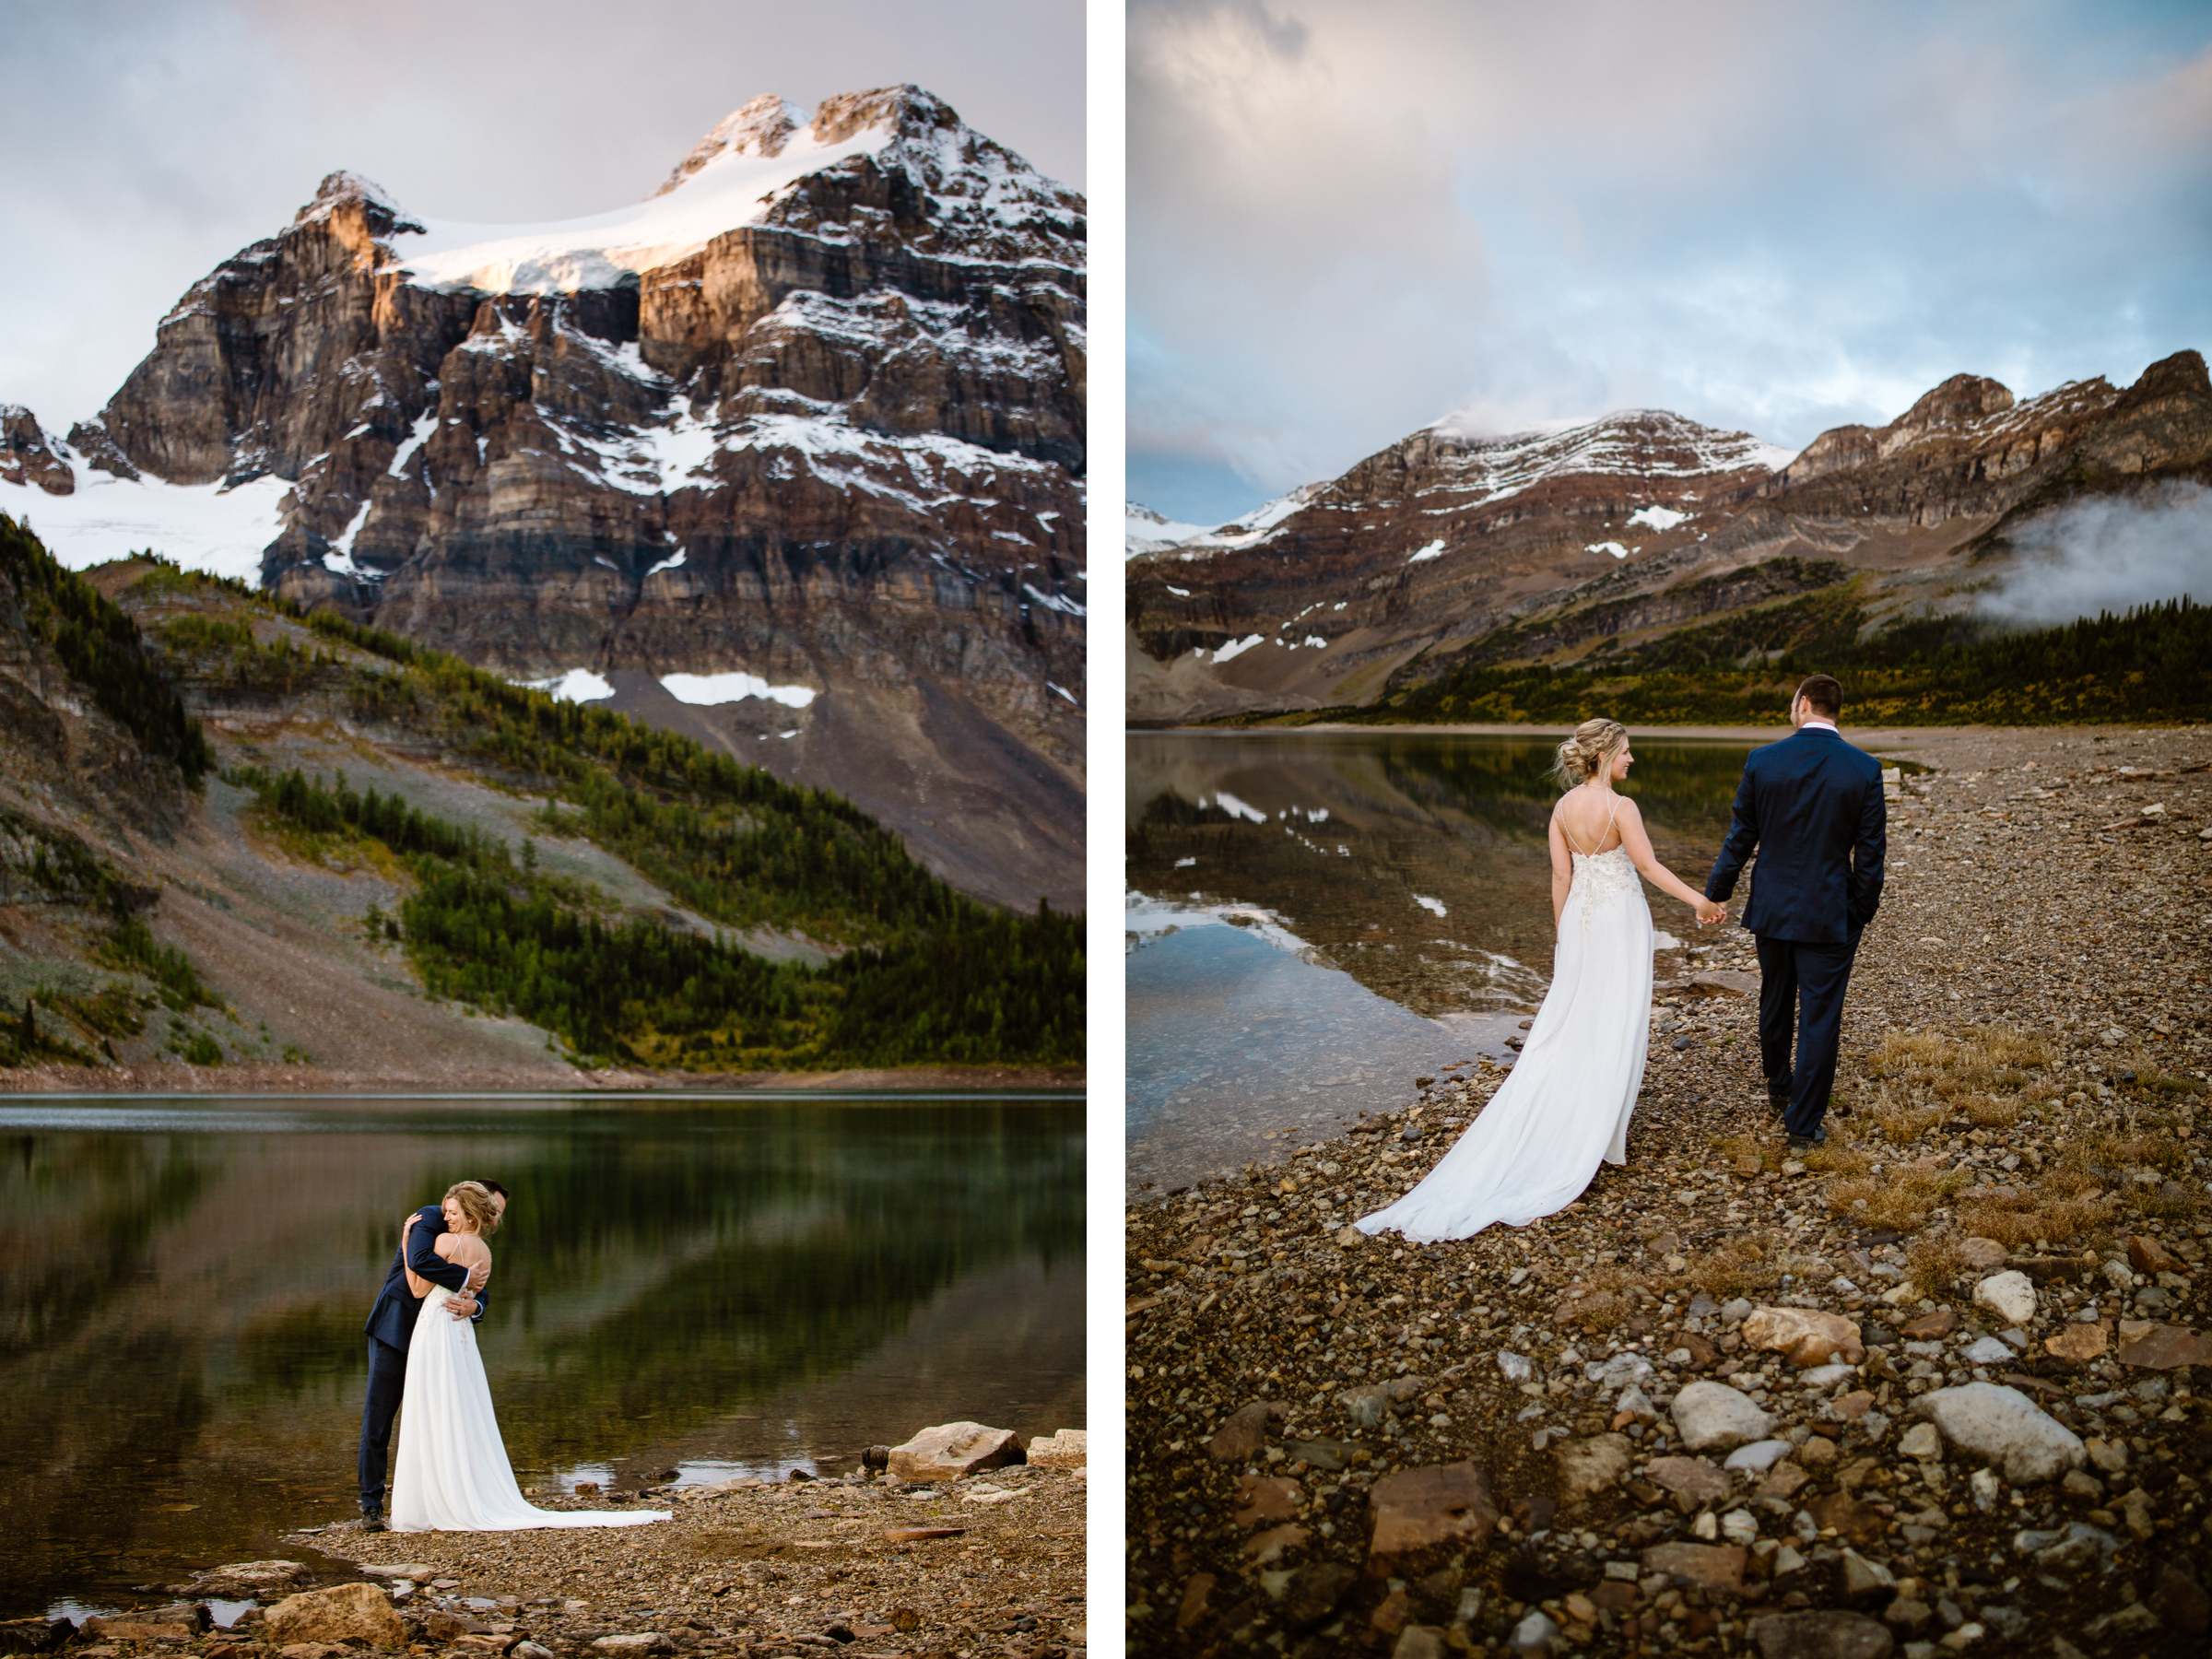 Mount Assiniboine Elopement Photographers at a Backcountry Lodge - Photo 53